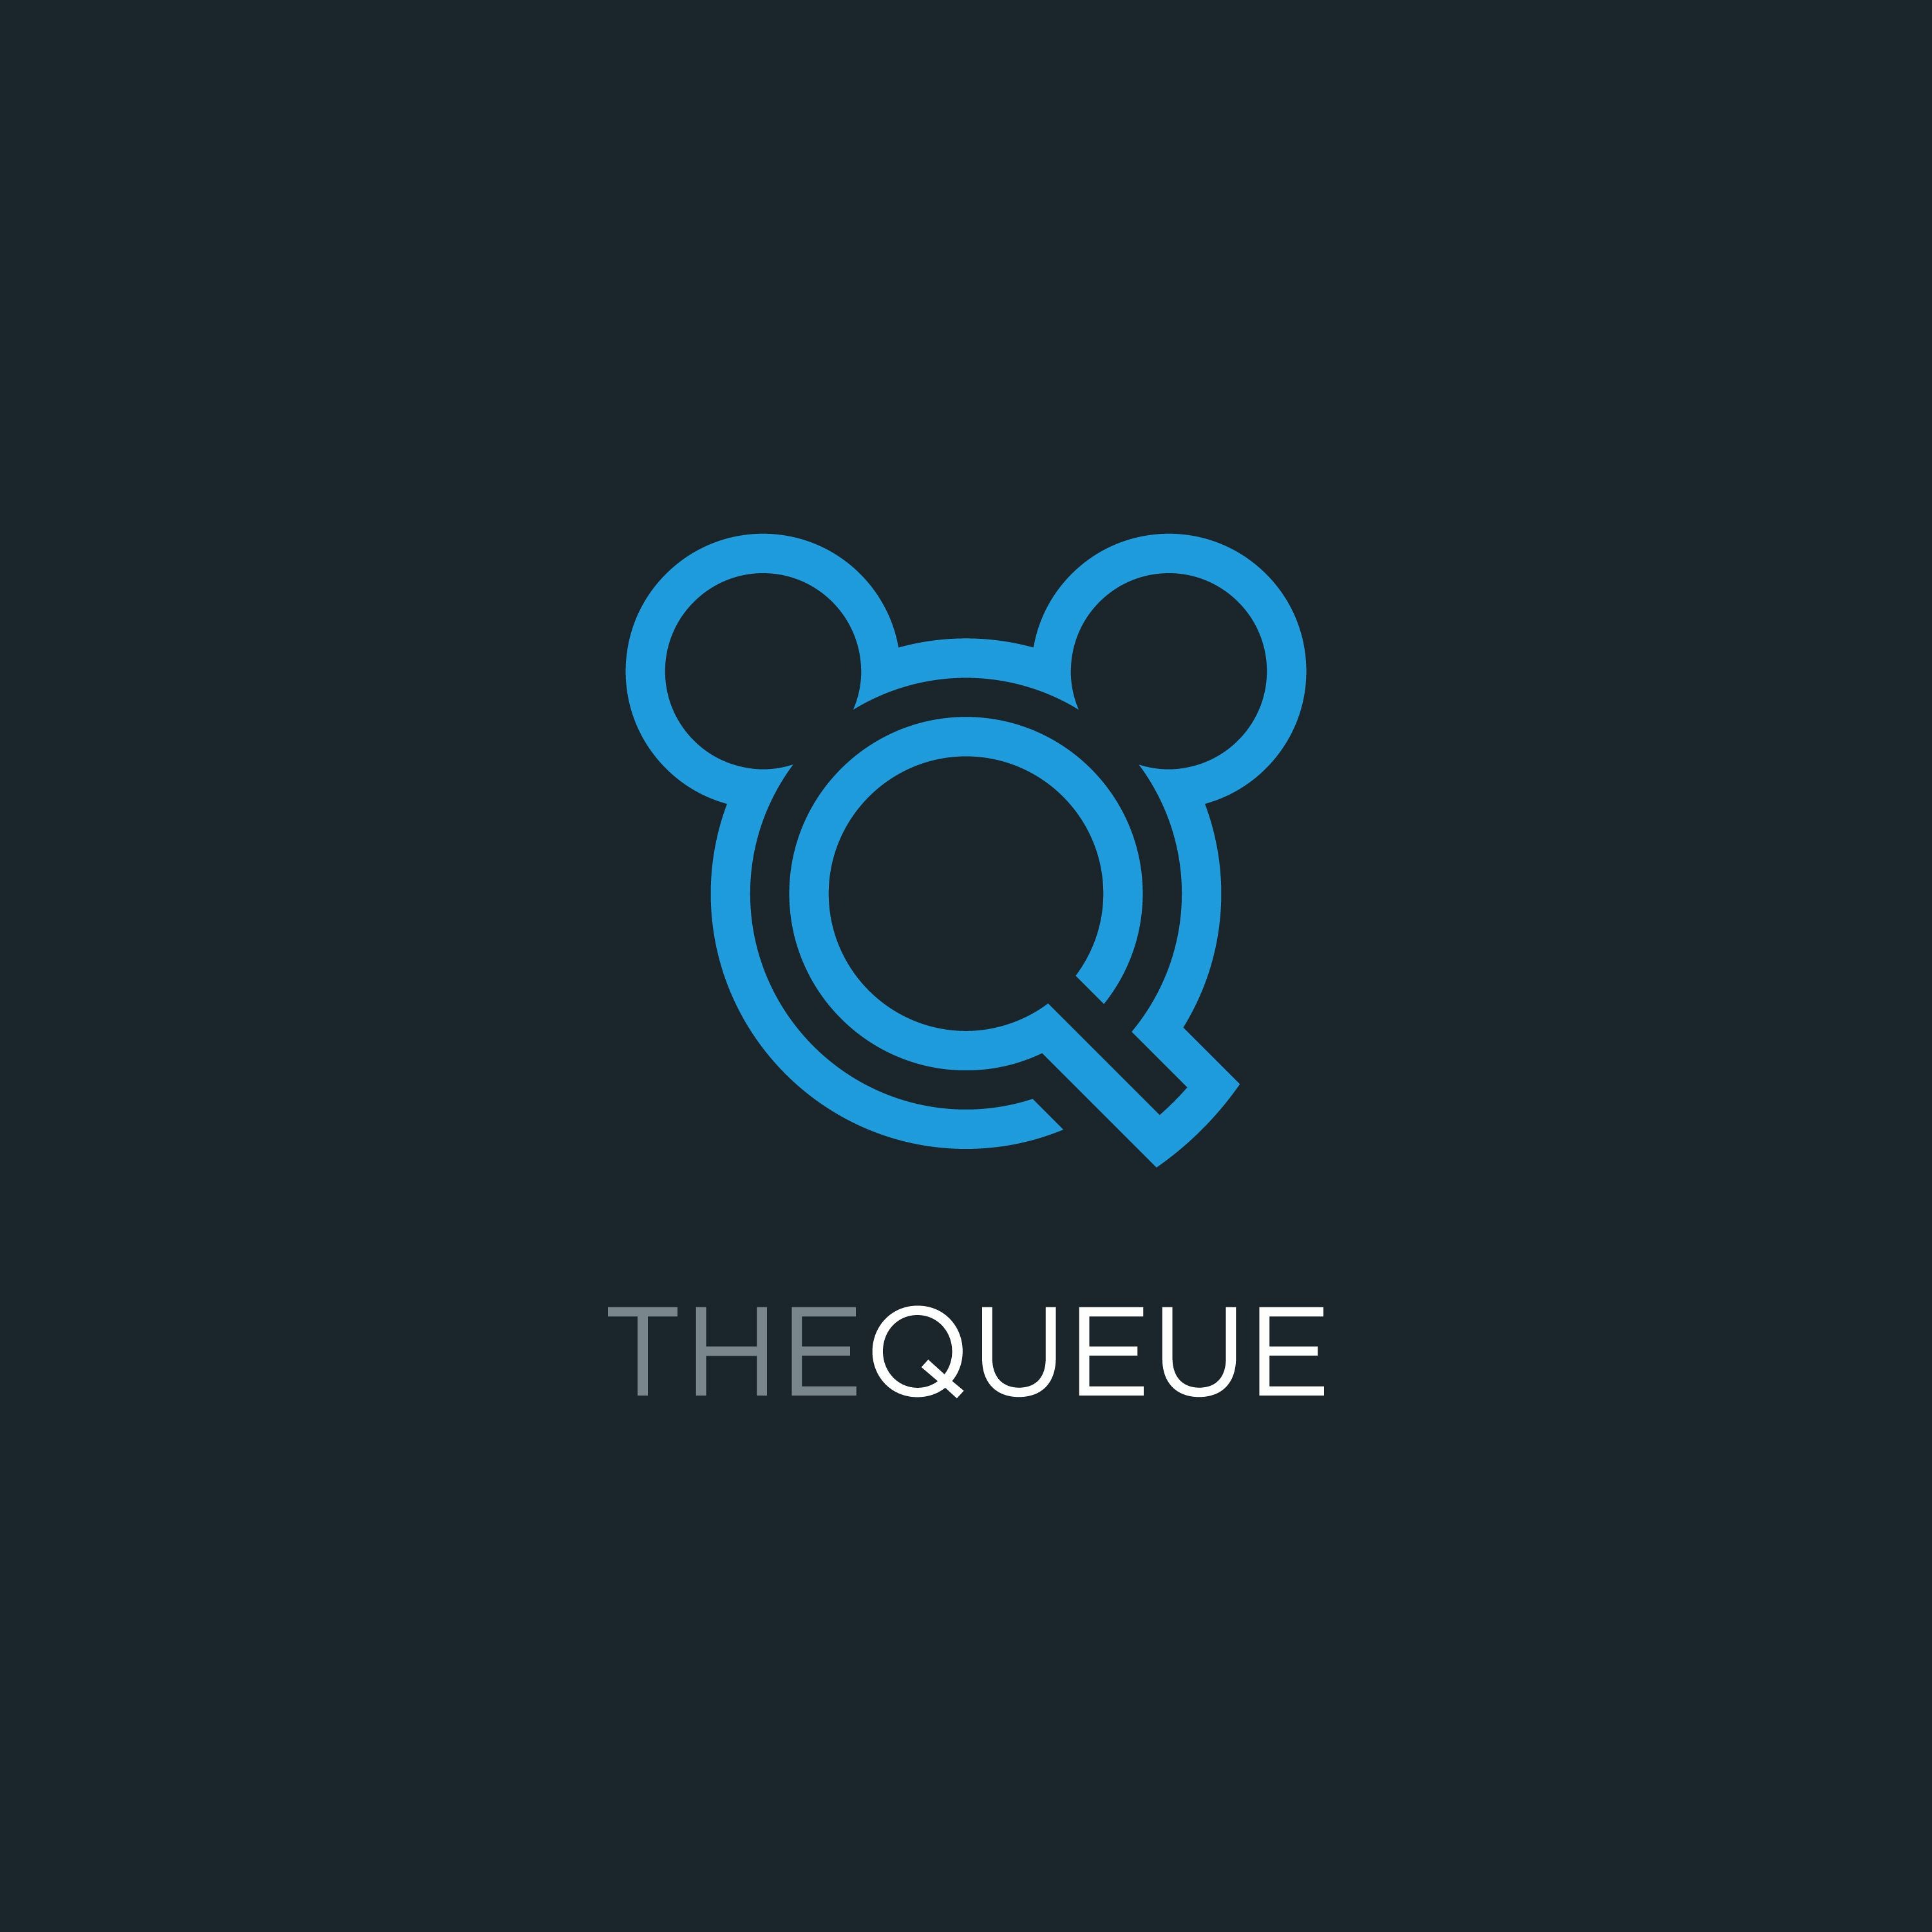 The Queue - Episode #21 - Is It Mythical, or Is It Magical? - Round 2